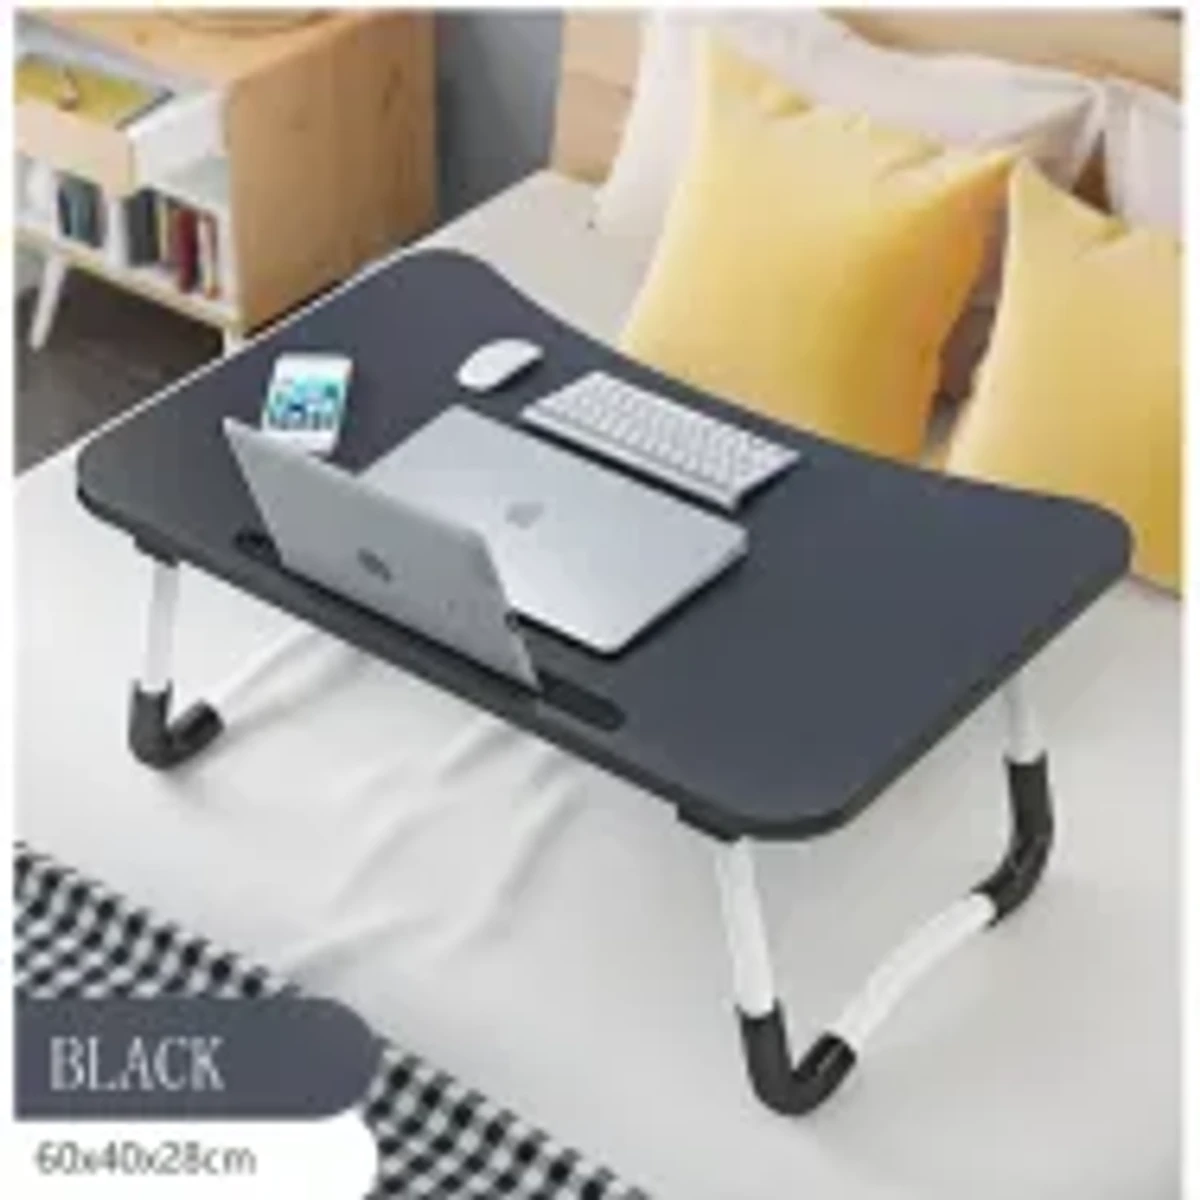 " Multi-function and Removable Stand Folding Computer Laptop Desk Small Bed Desk Simple Dormitory Lazy Table Bed with Laptop Table with Holder Slot Portable Table Stand for Laptop Tablet Reading Table - cloth stand"